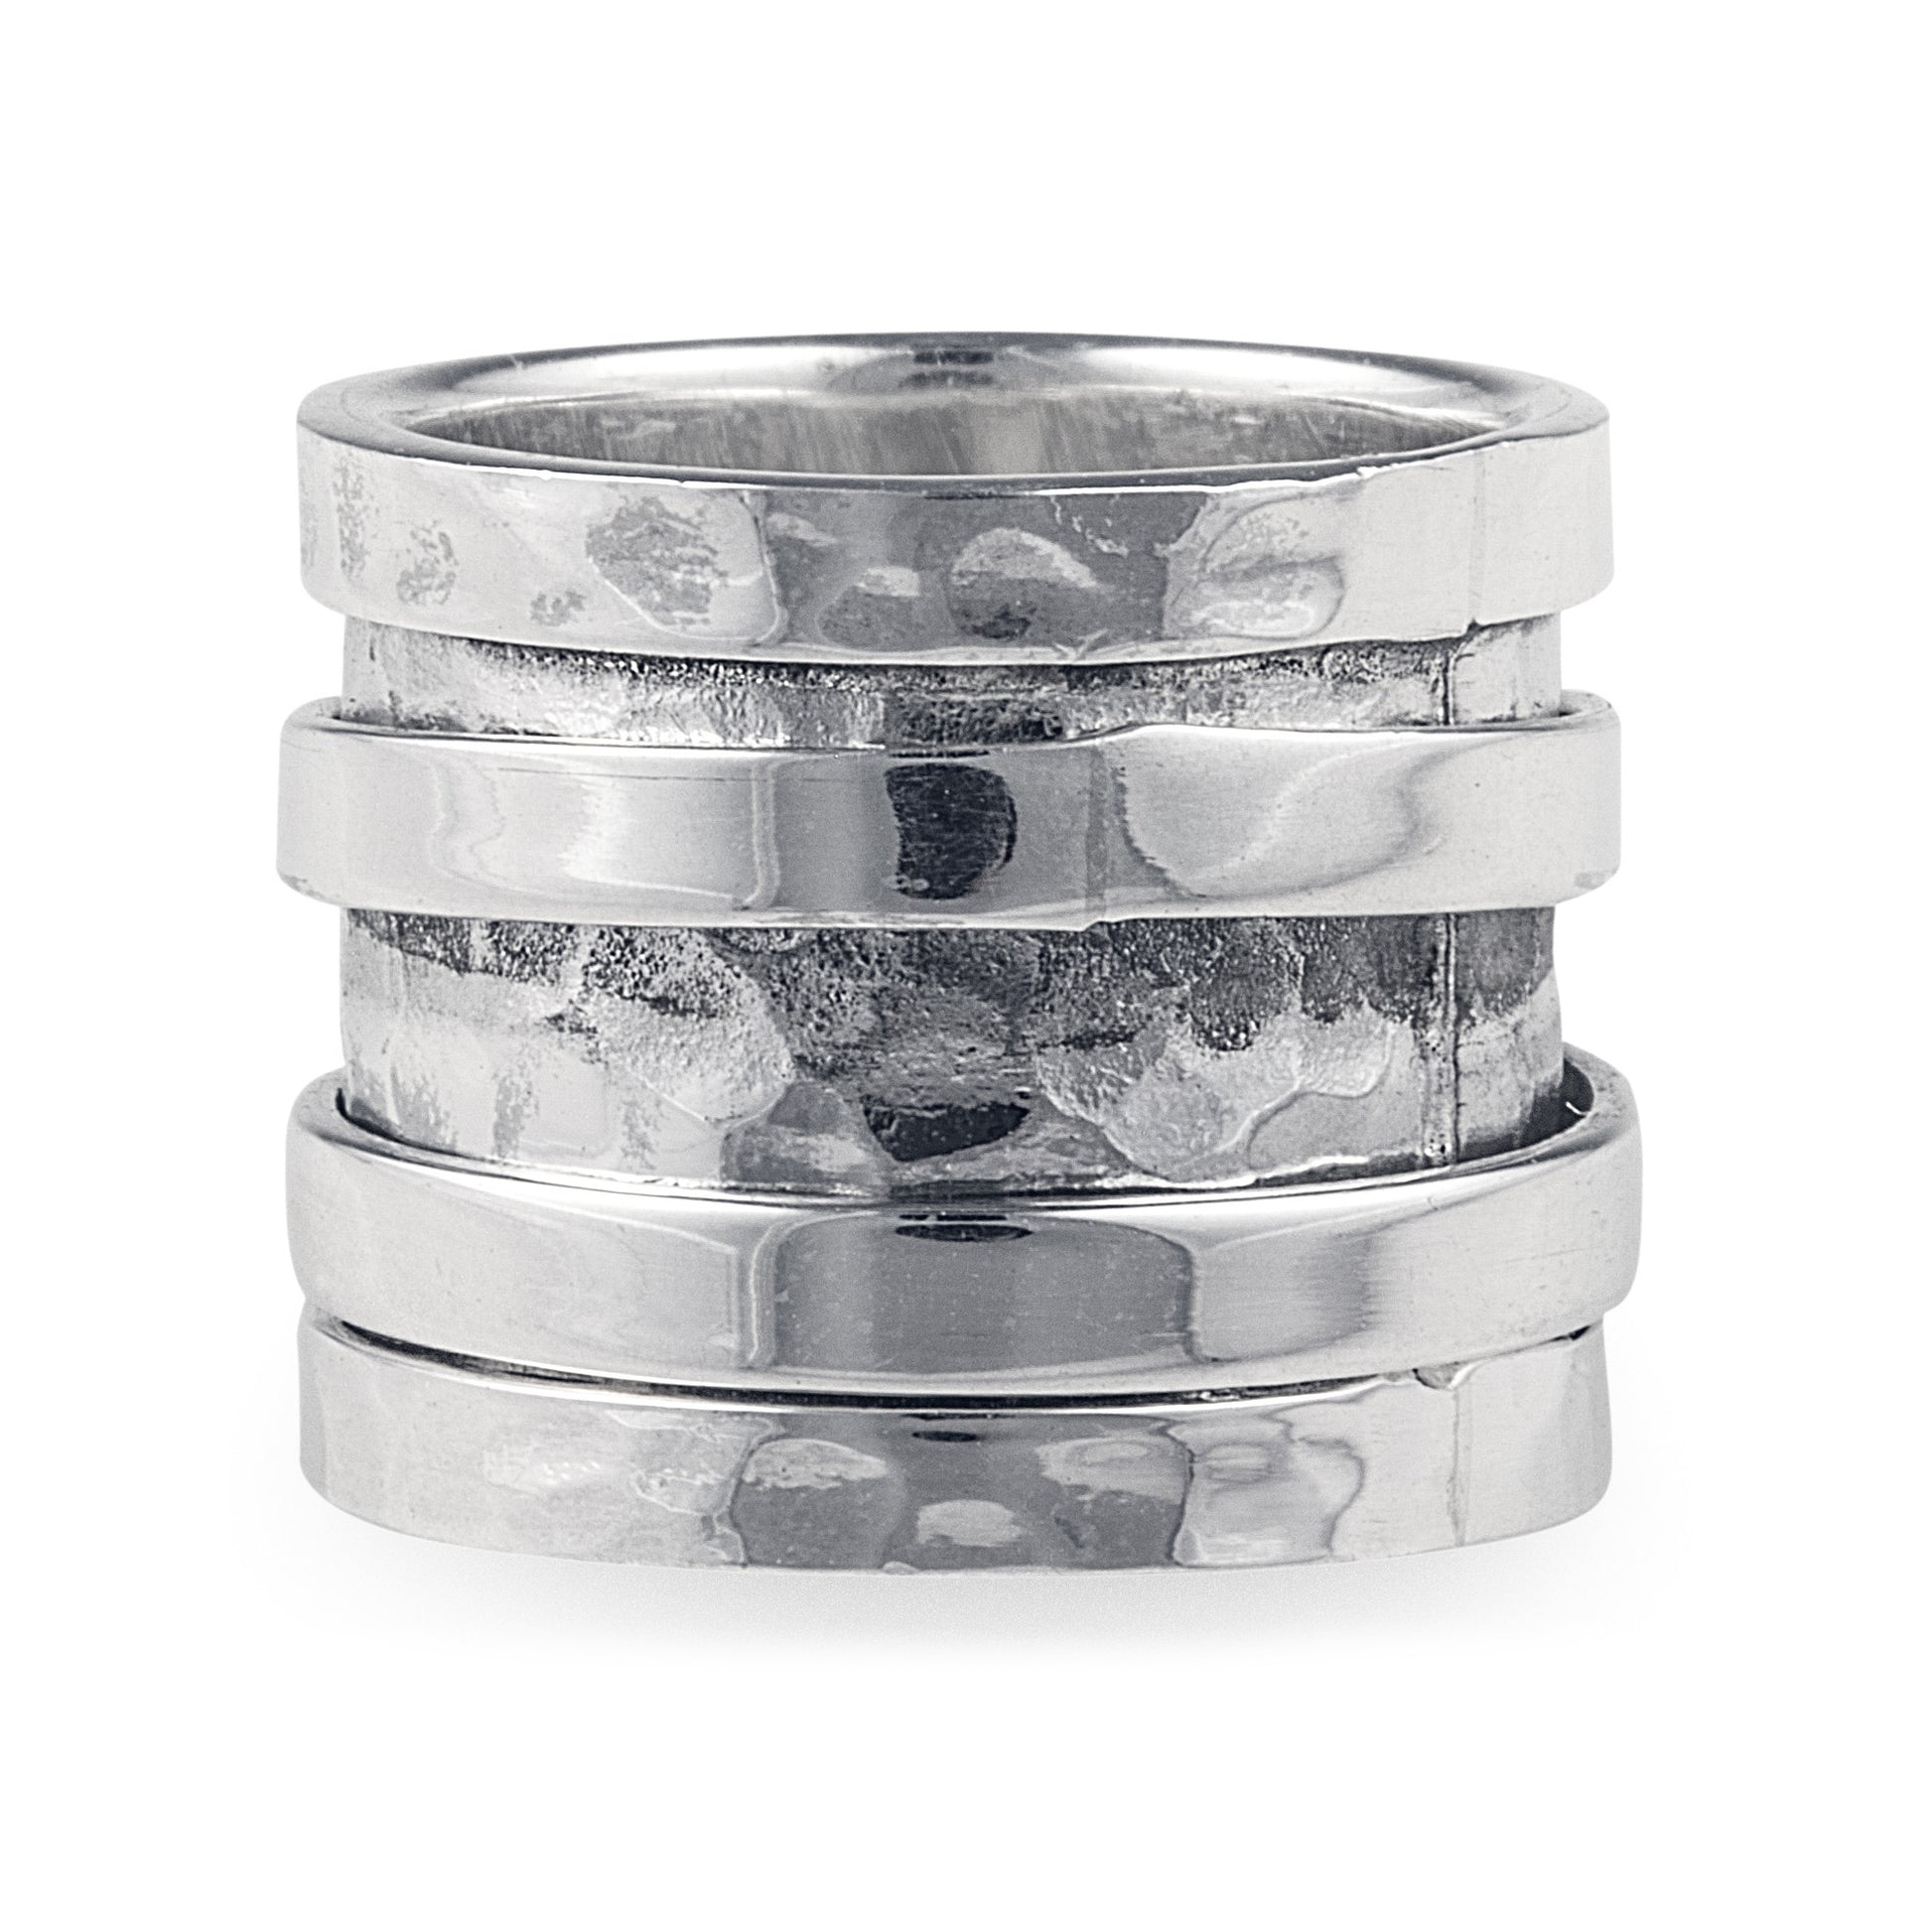 Silver Spin Ring in 925 Sterling Silver. Worldwide Shipping. Affordable luxury jewellery by Bellagio & Co.